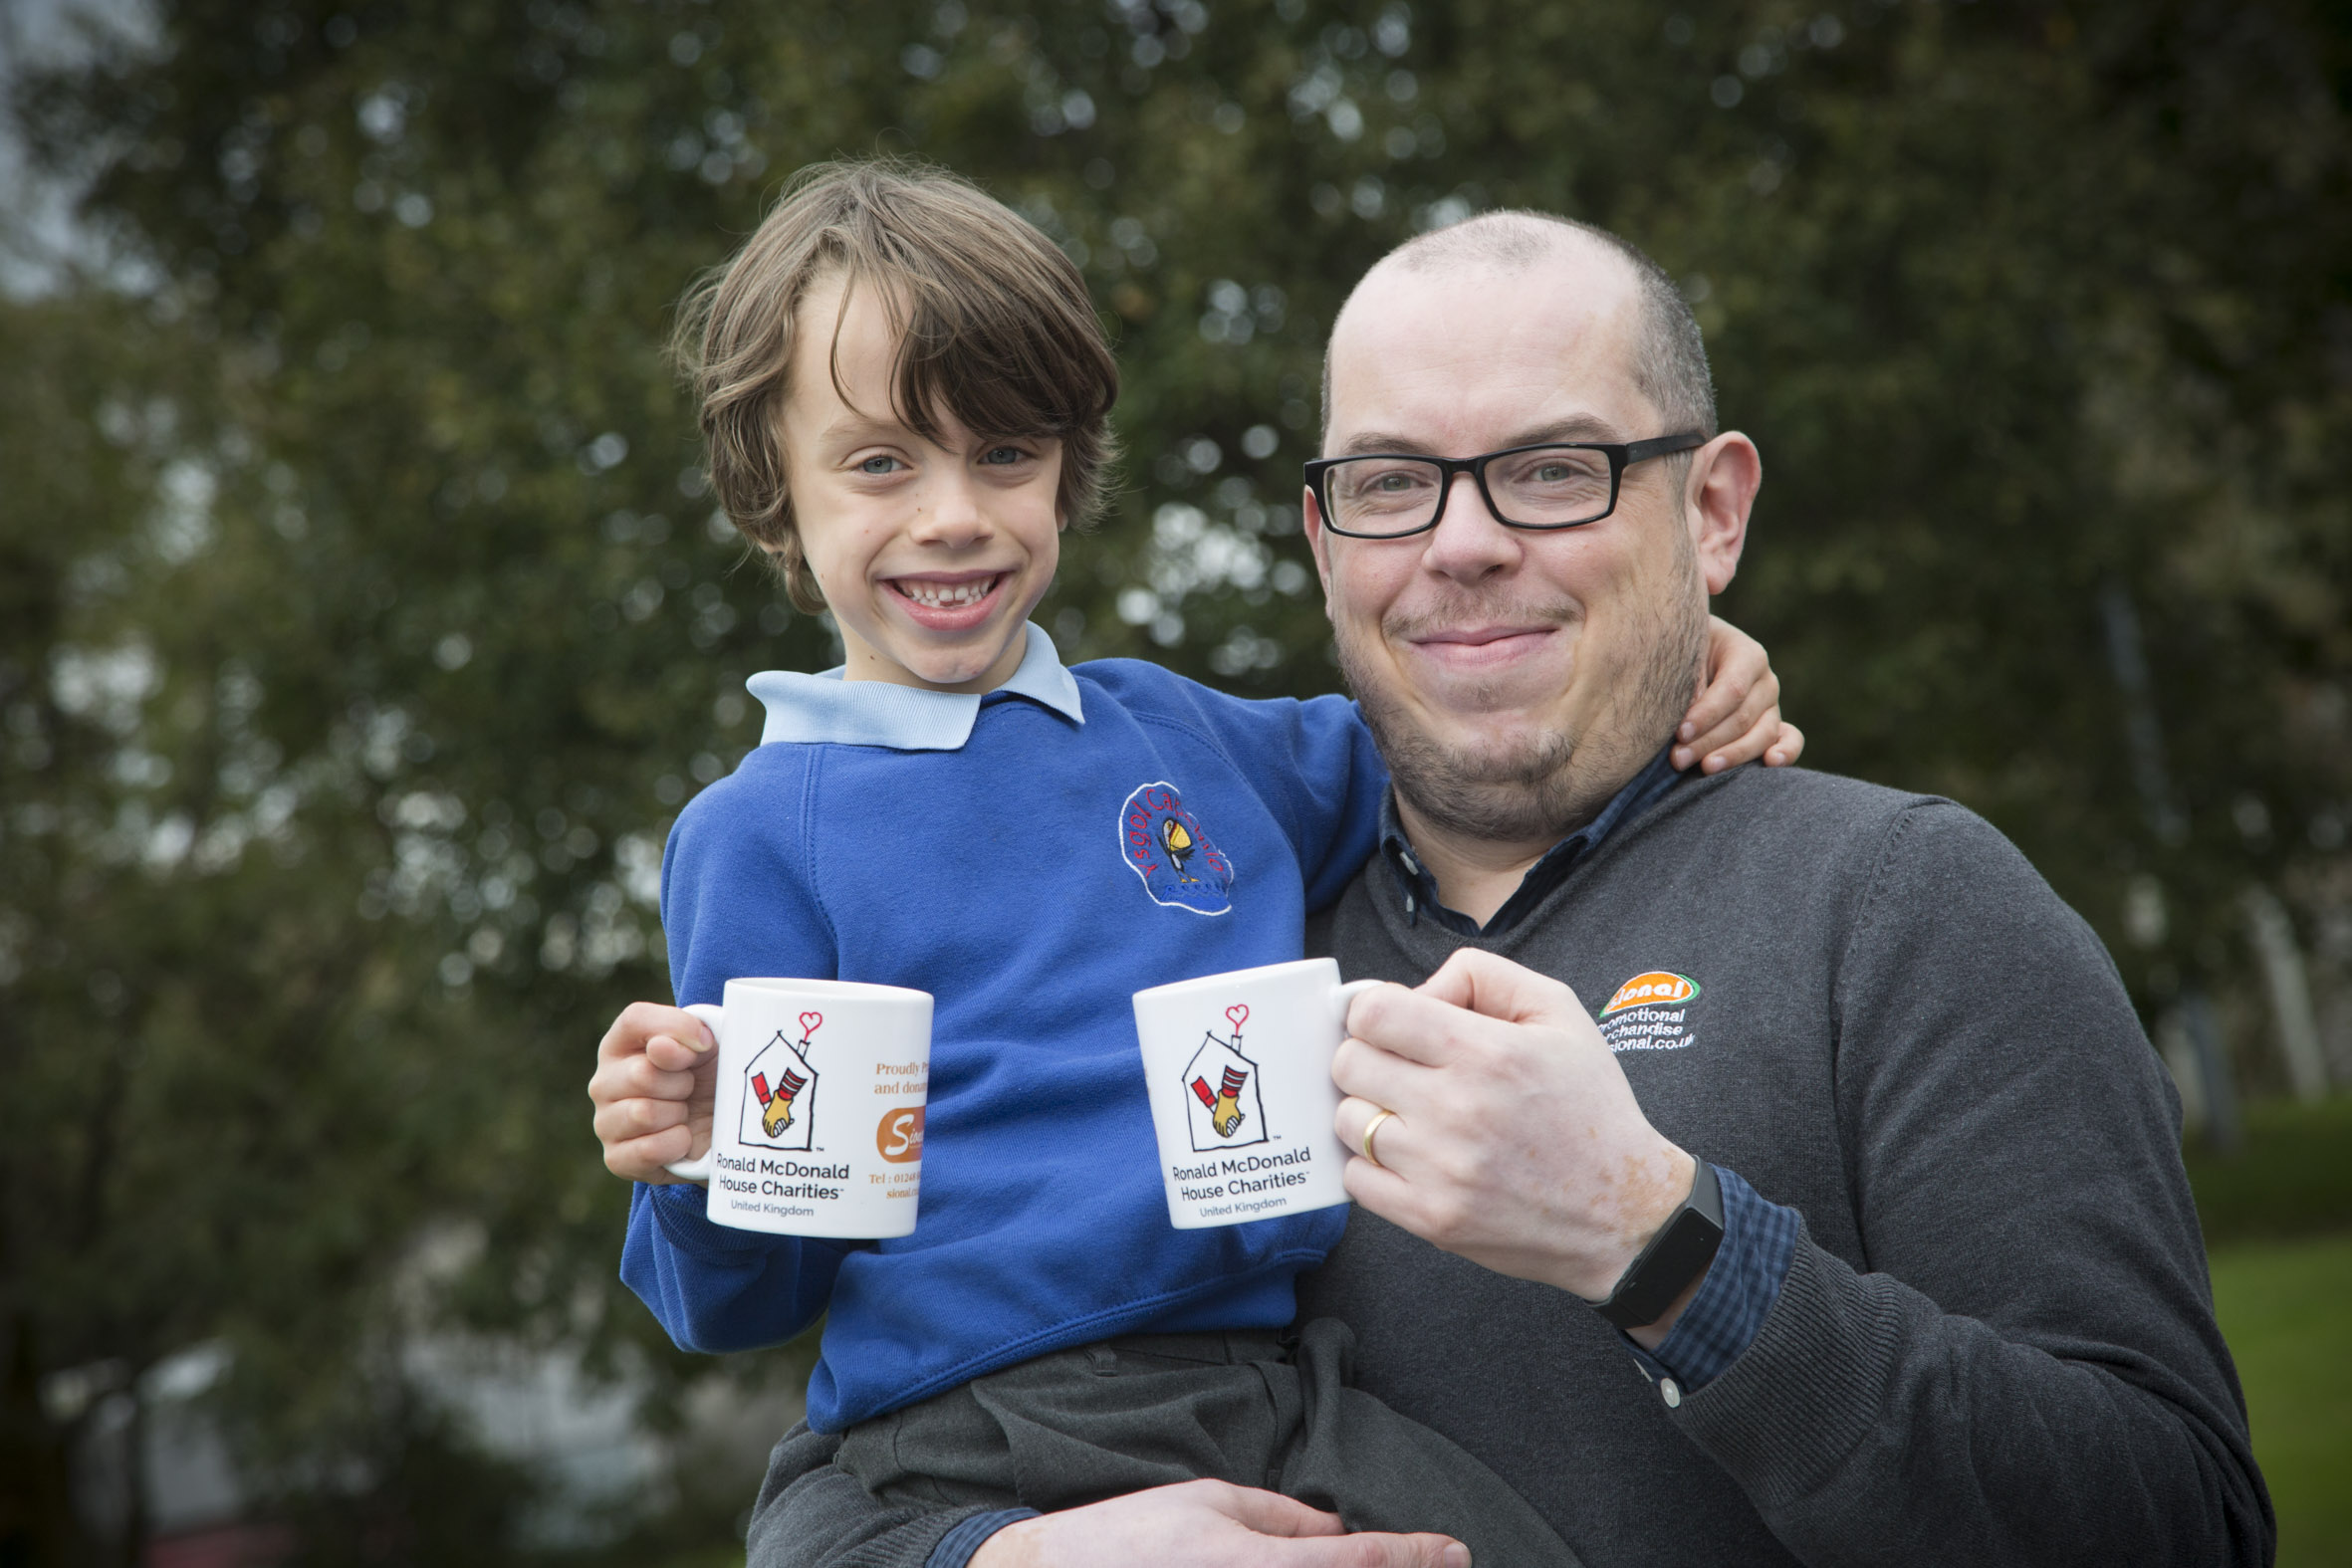 Mugs up for Ronald McDonald House charities thanks to merchandising firm Sional